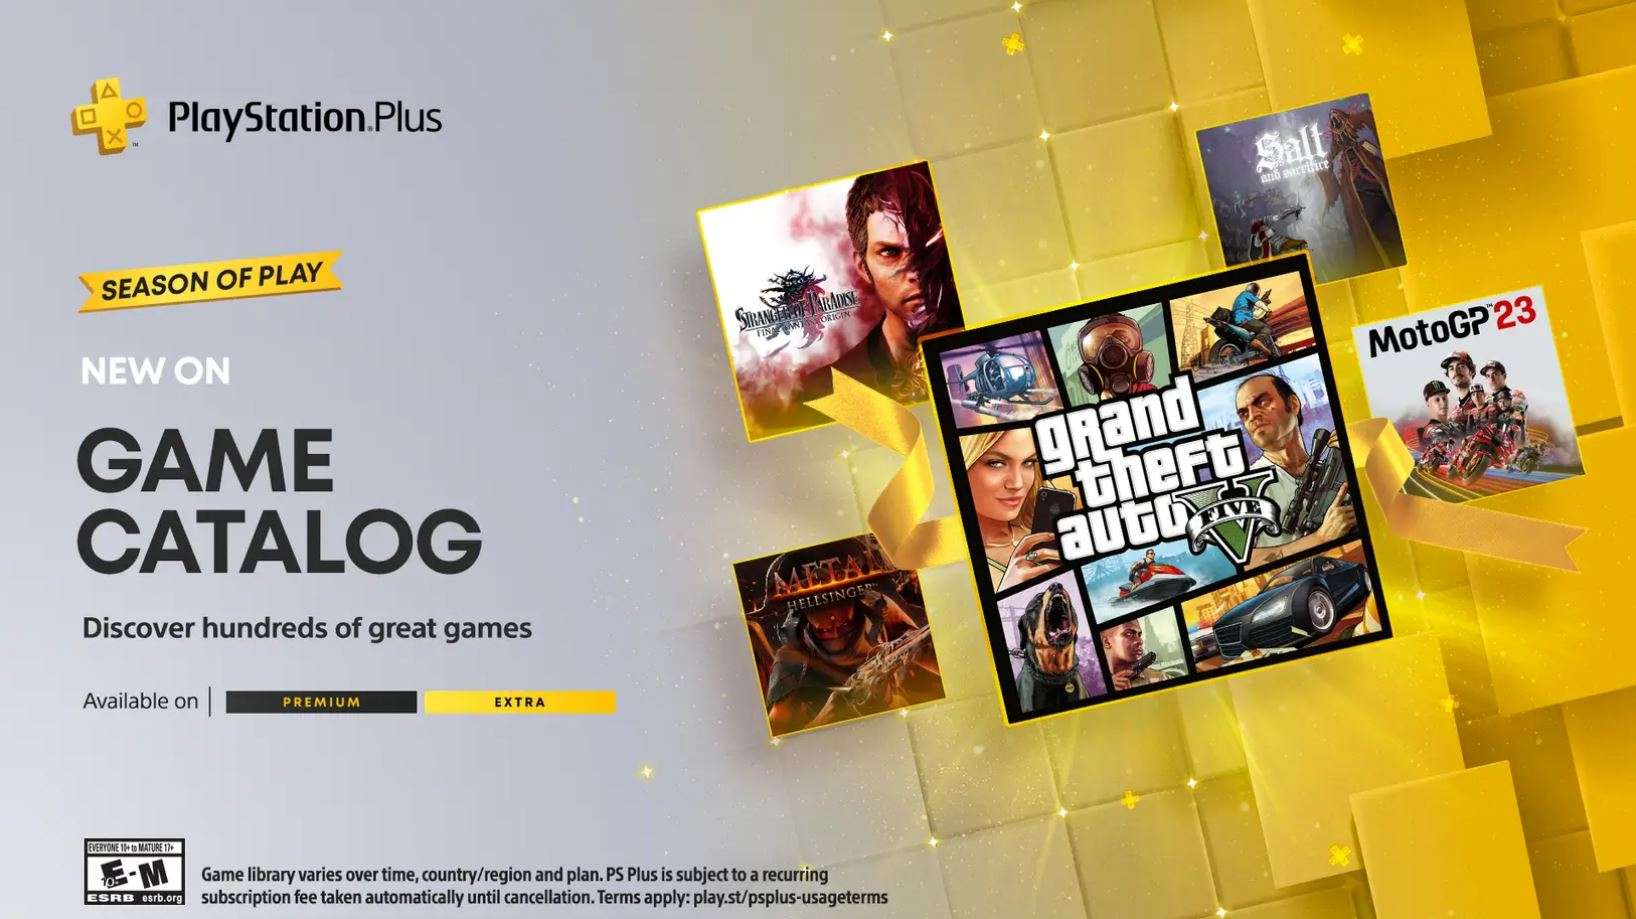 PlayStation Plus Extra and Premium October 2023 Games Lineup Revealed